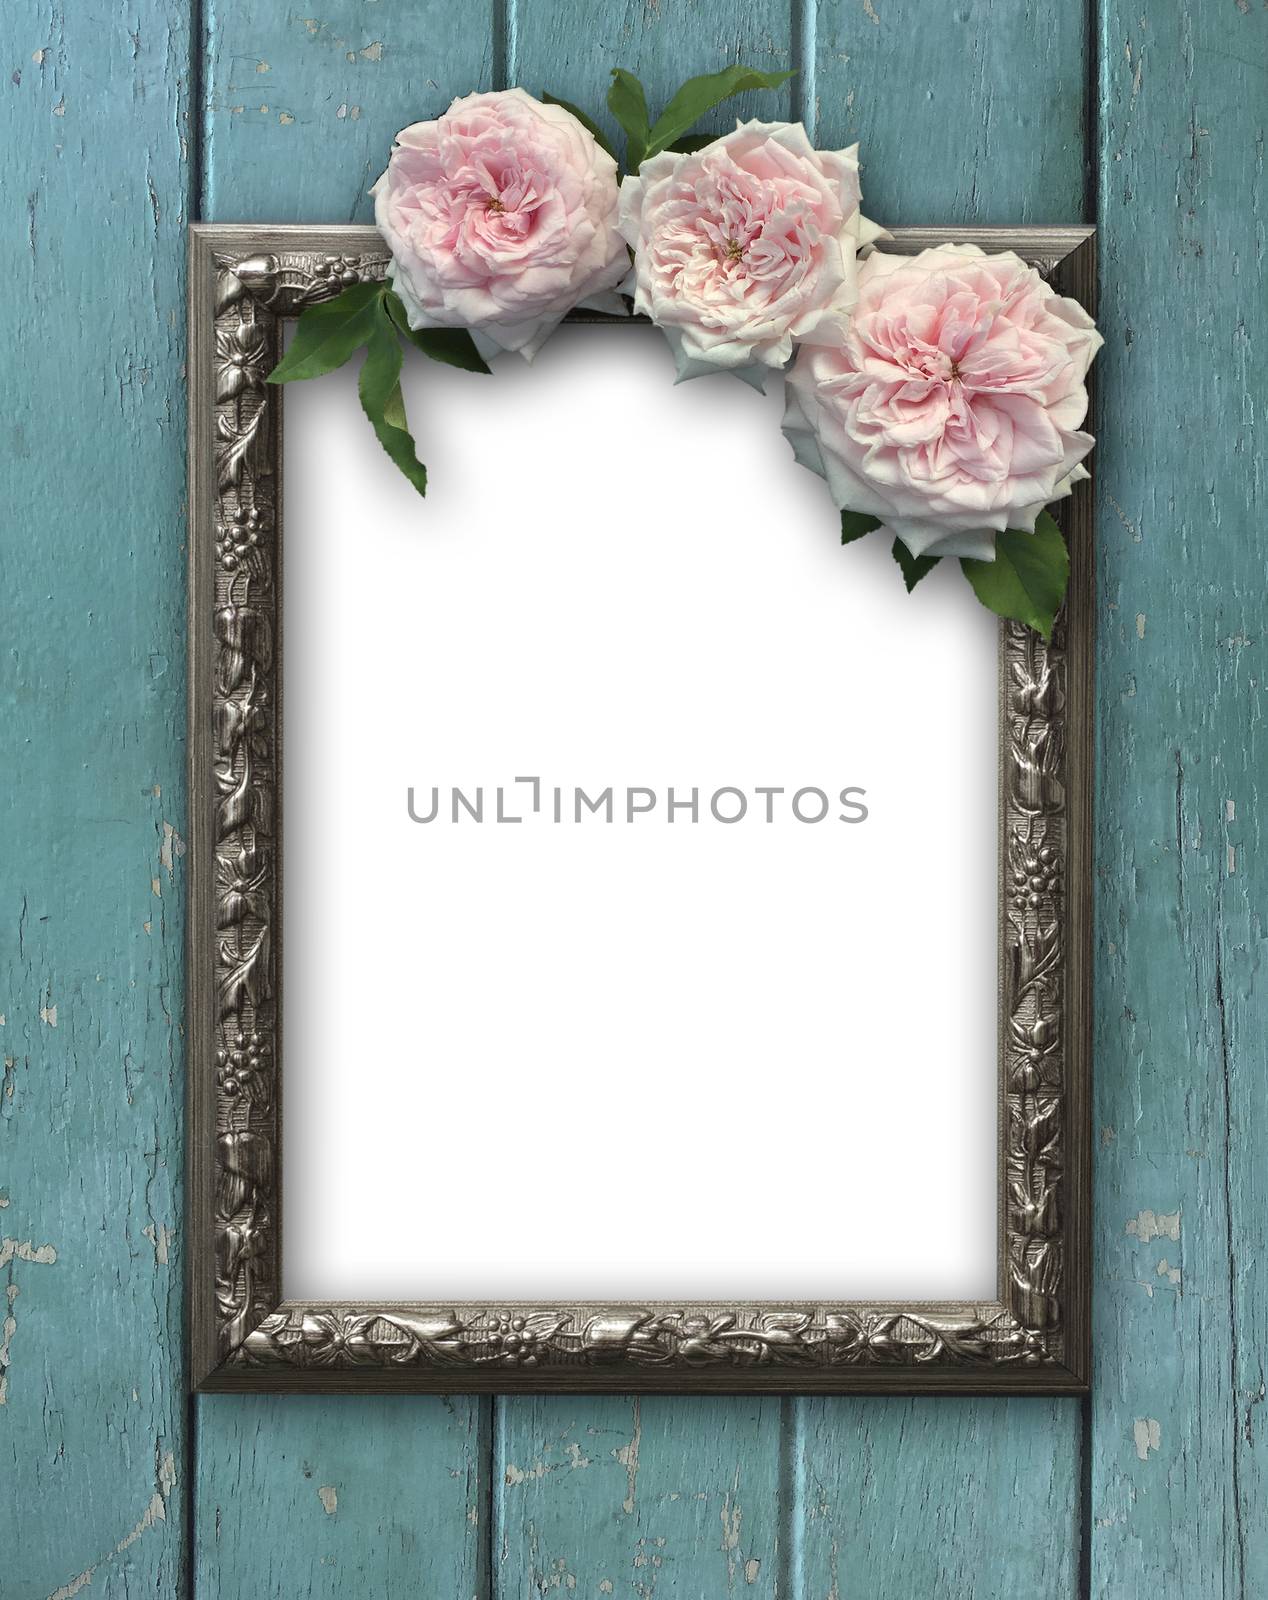 Vintage rose and blank photo frame on old wooden background by ohhlanla